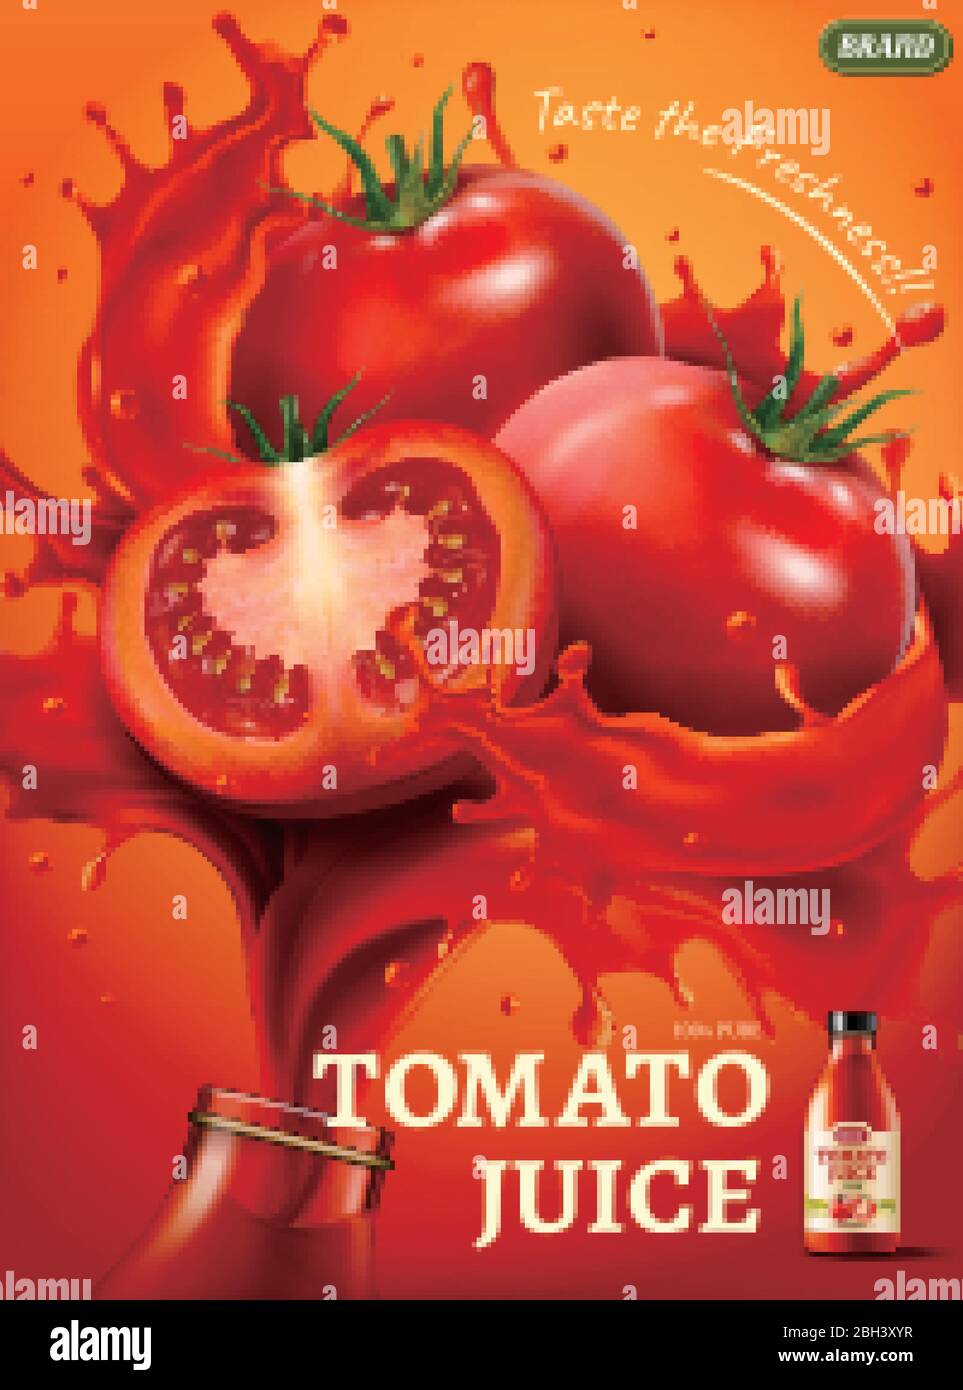 Fresh tomato juice ad, realistic glass bottle rim with whole and sliced tomatoes in splashes, 3D illustration Stock Vector